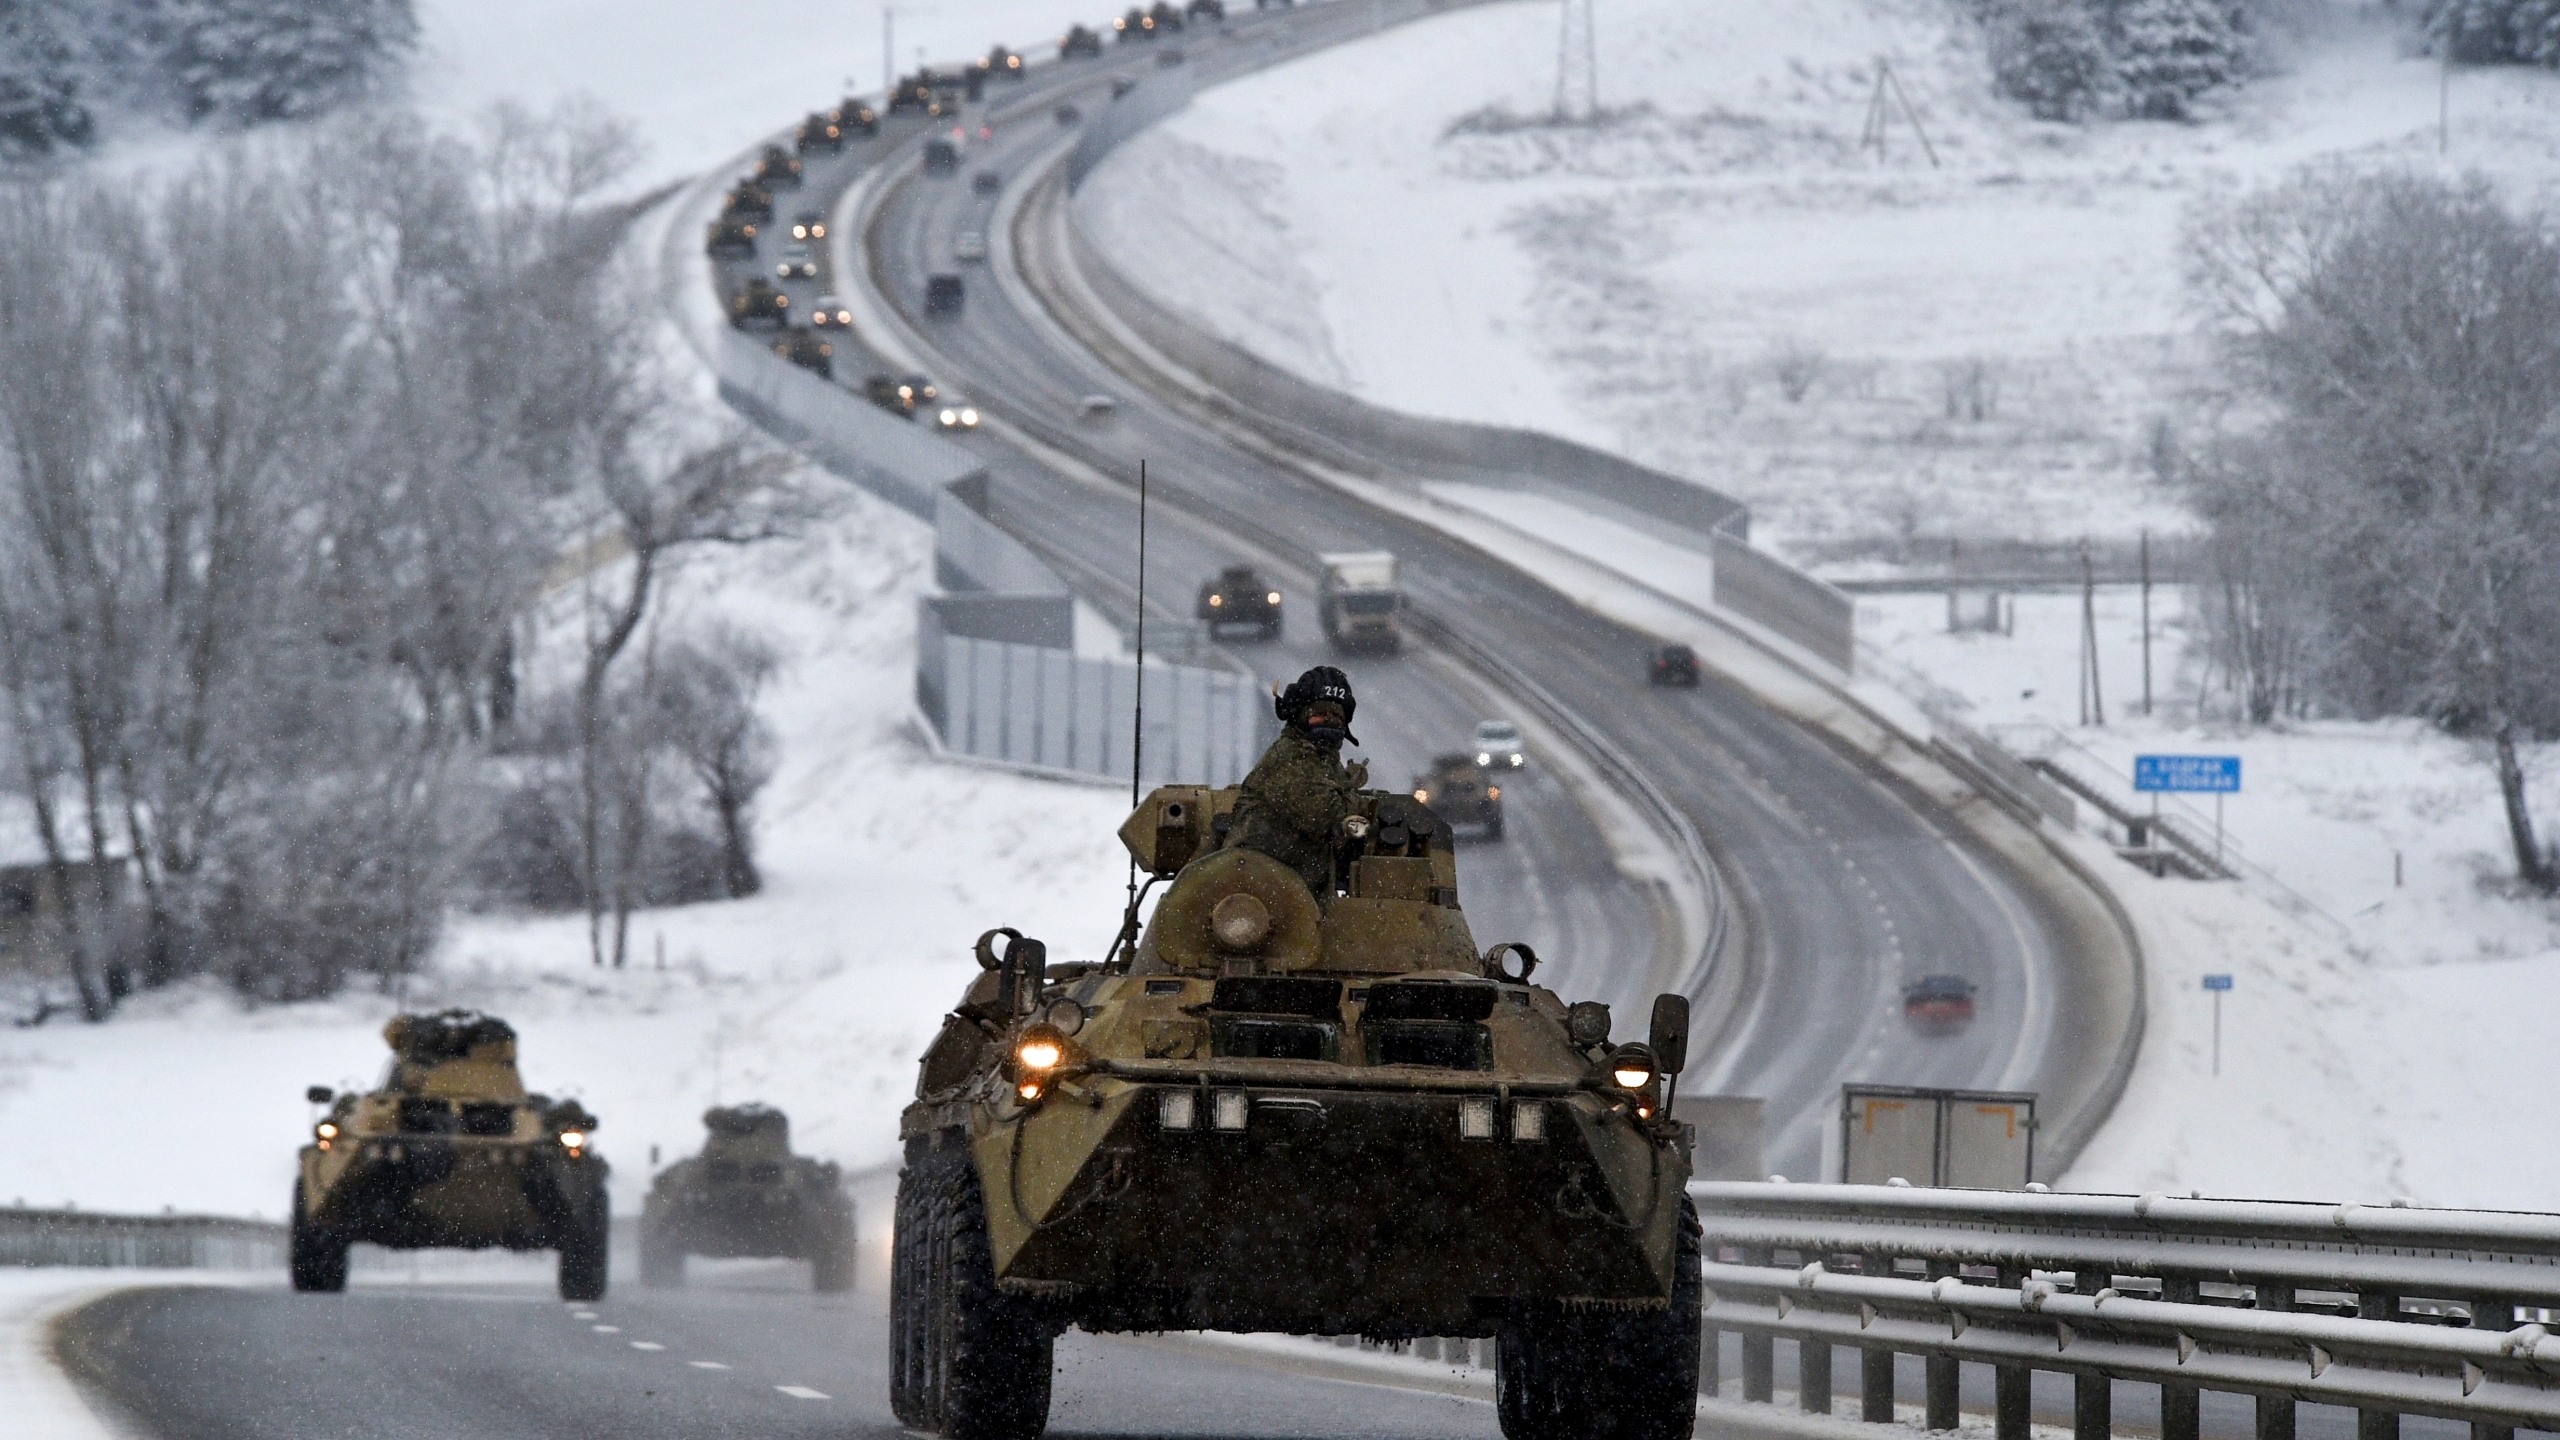 EXPLAINER: What are US military options to help Ukraine?